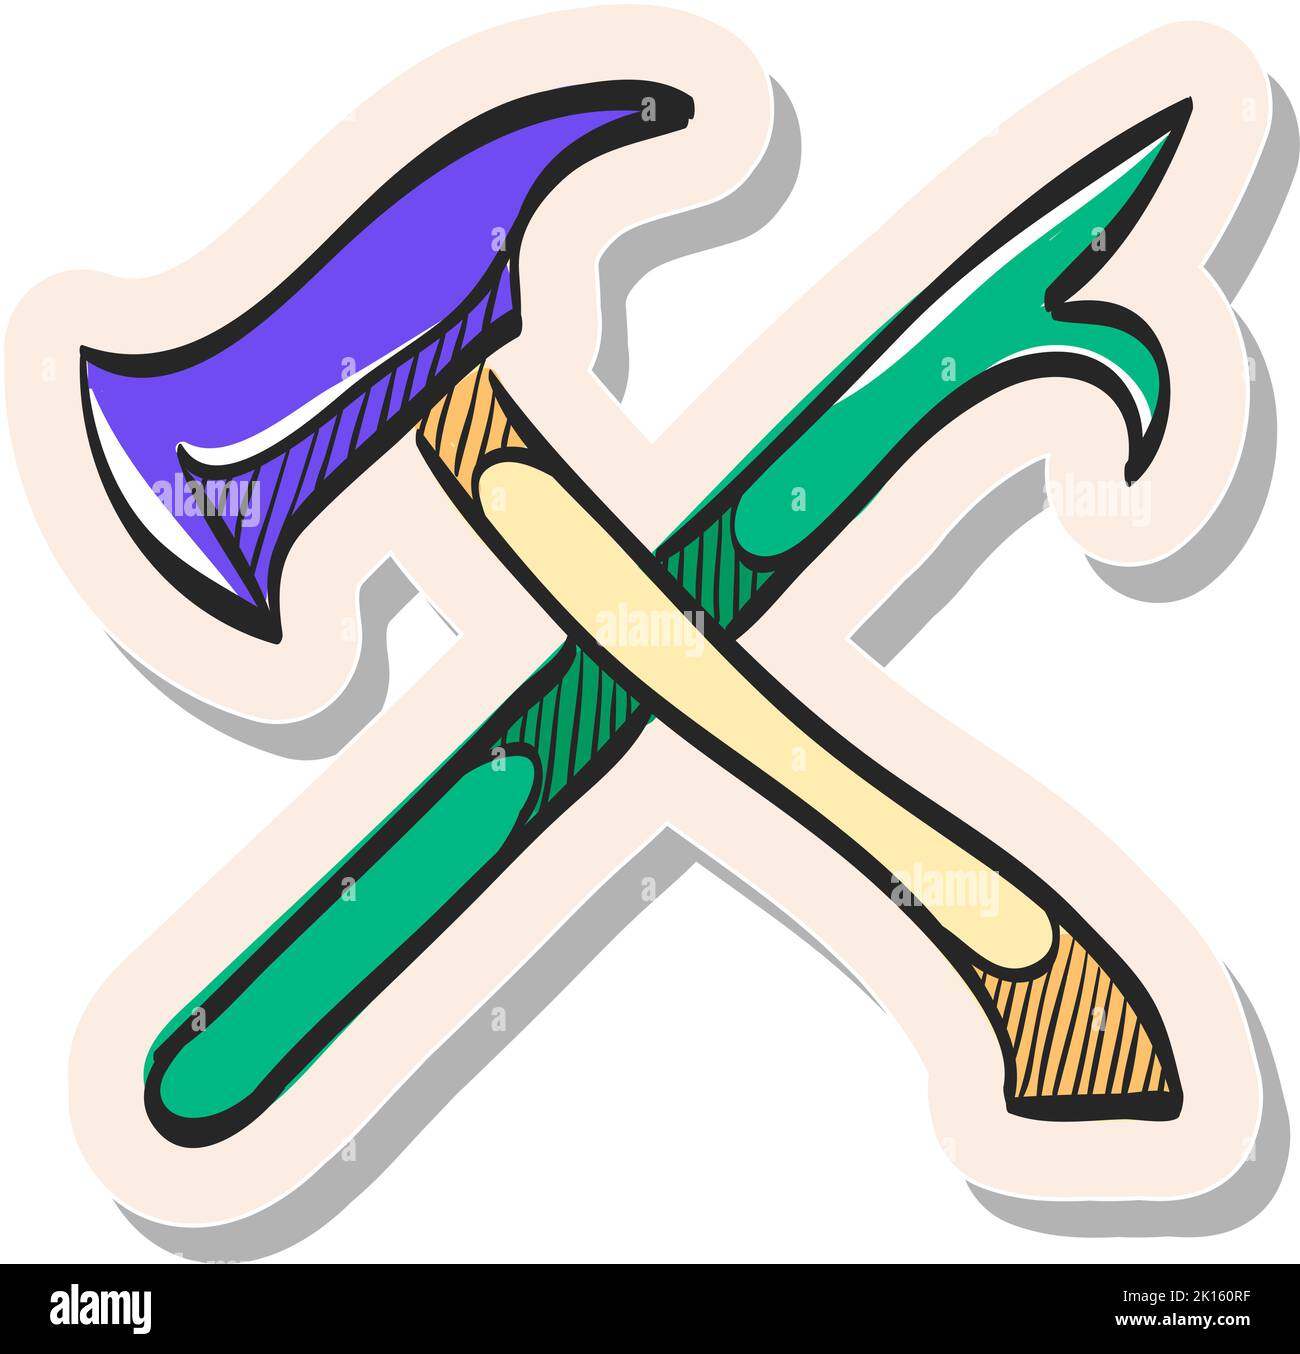 Hand drawn Fireman tools icon in sticker style vector illustration Stock Vector